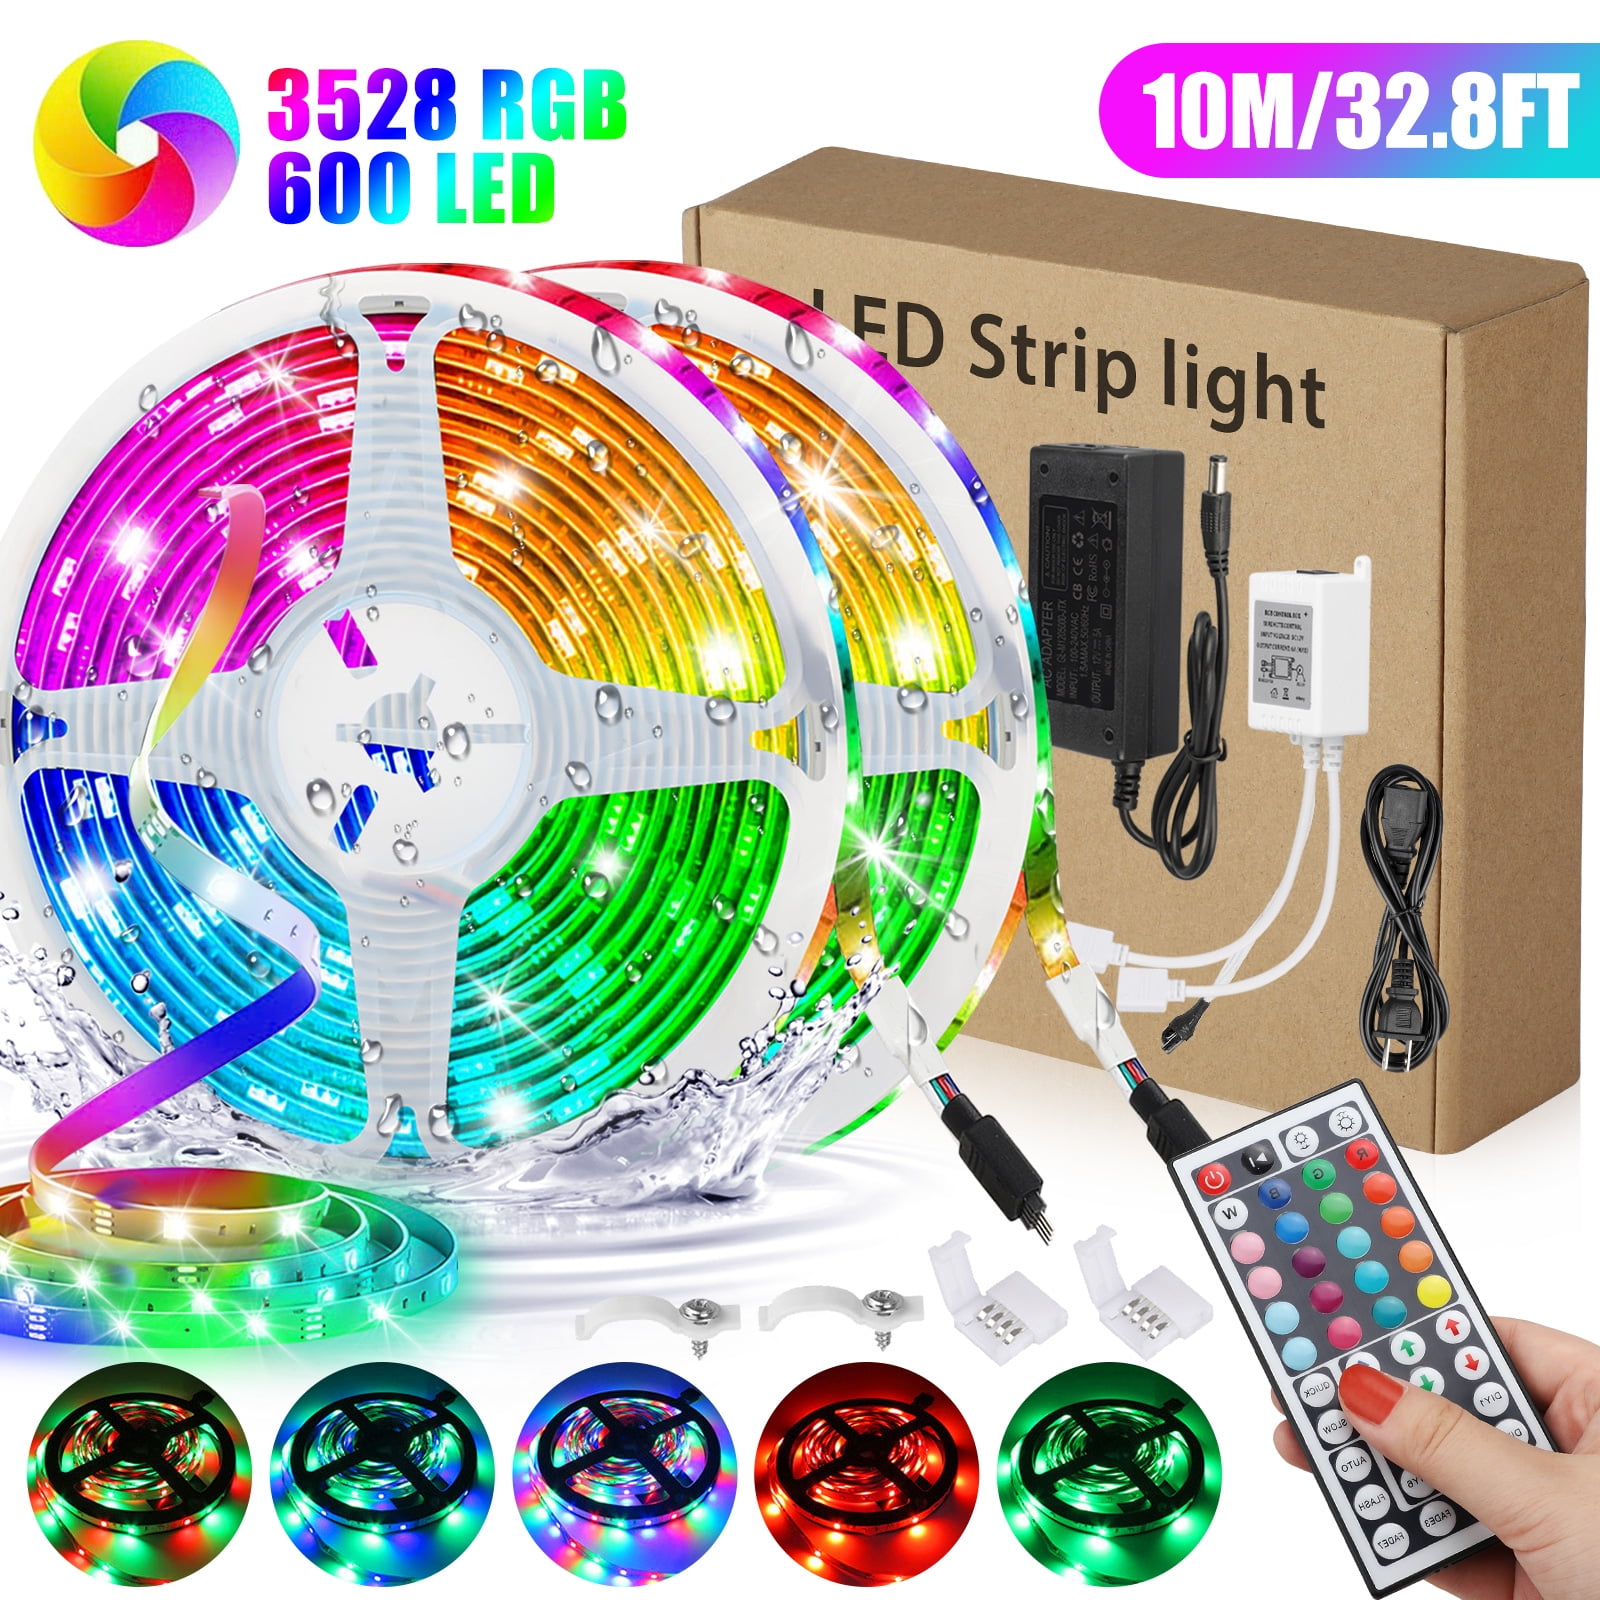 Remote Contr Details about   Govee Rgbic Led Strip Lights 32.8 Feet Smart Wifi And App Control 